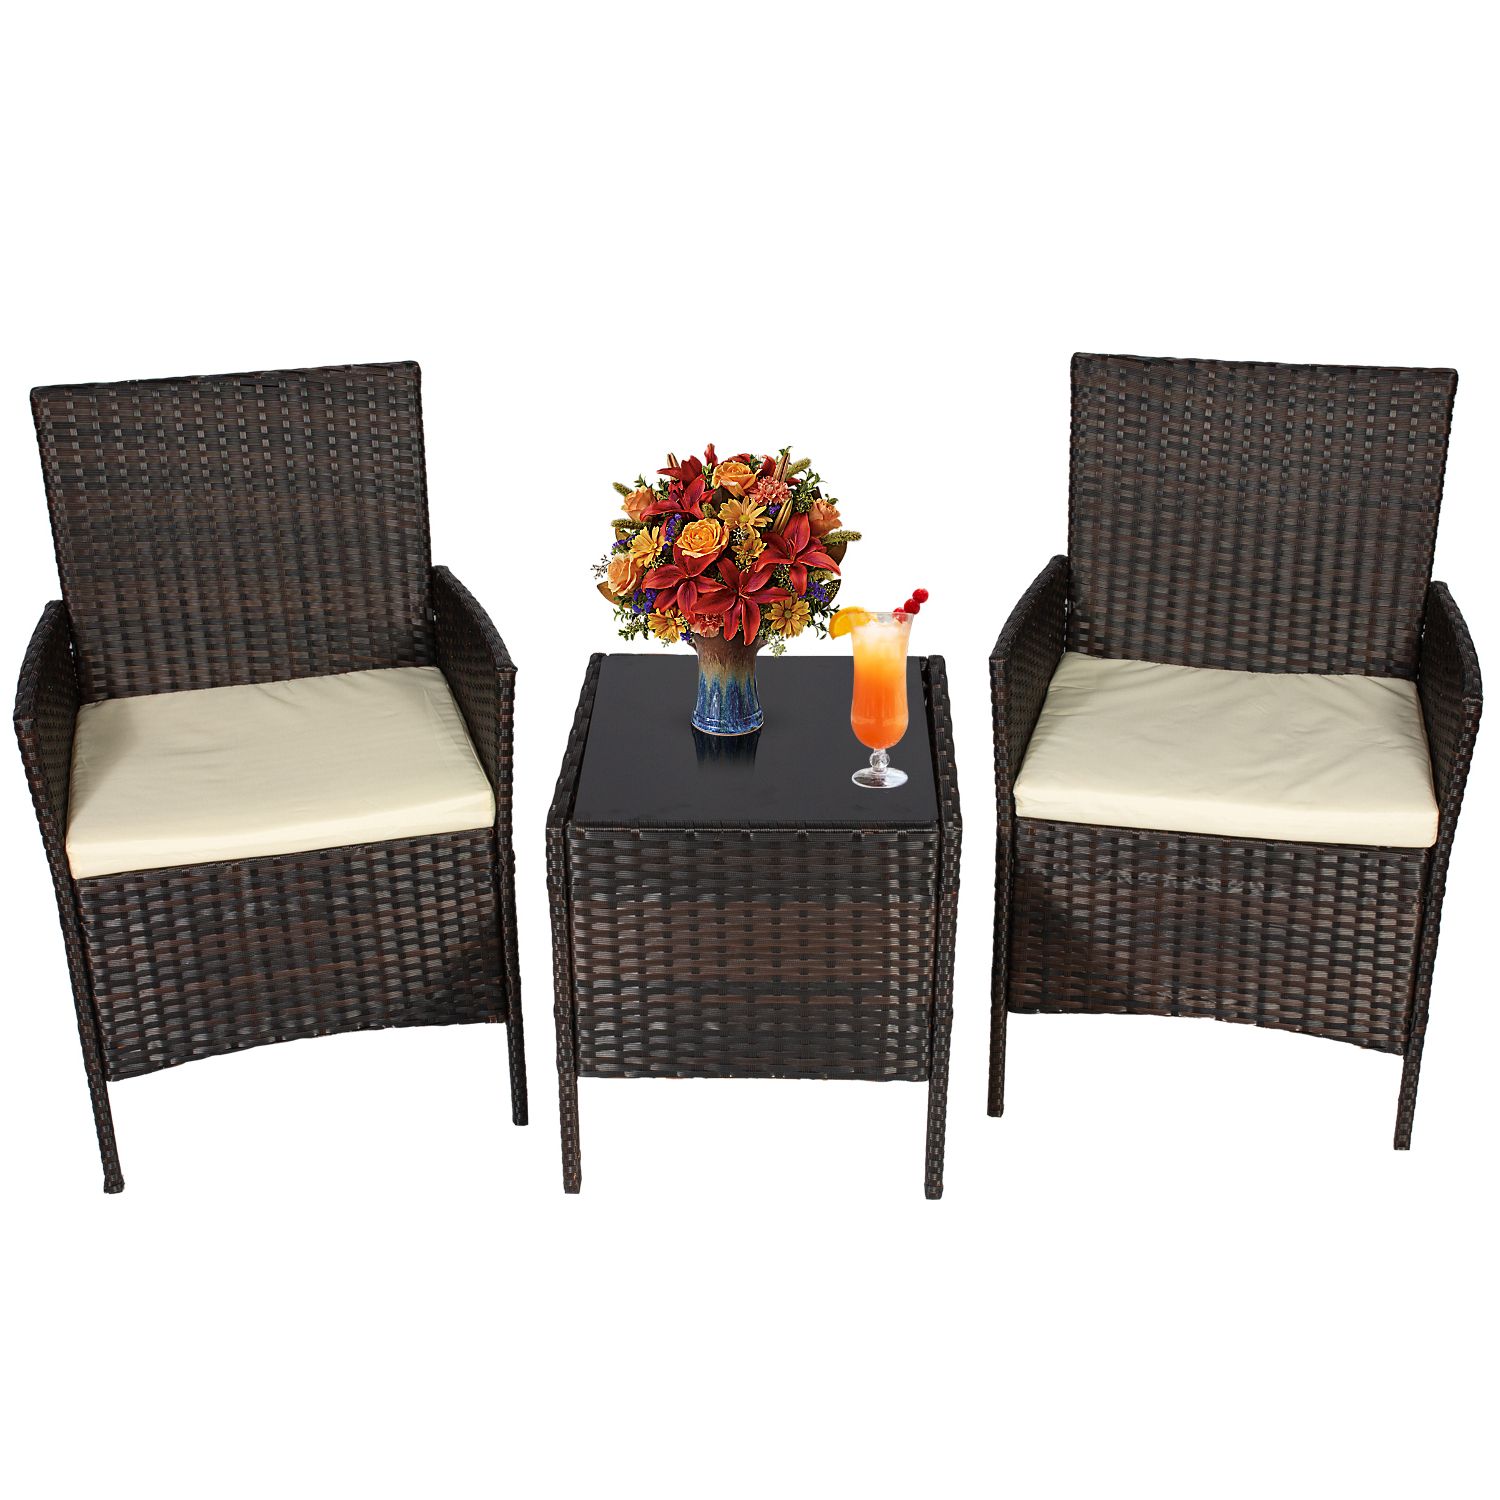 Outdoor Patio Furniture Sets Pe Rattan Wicker Bistro Set Small Coffee Pertaining To Well Liked Indoor Outdoor Conversation Sets (View 6 of 15)